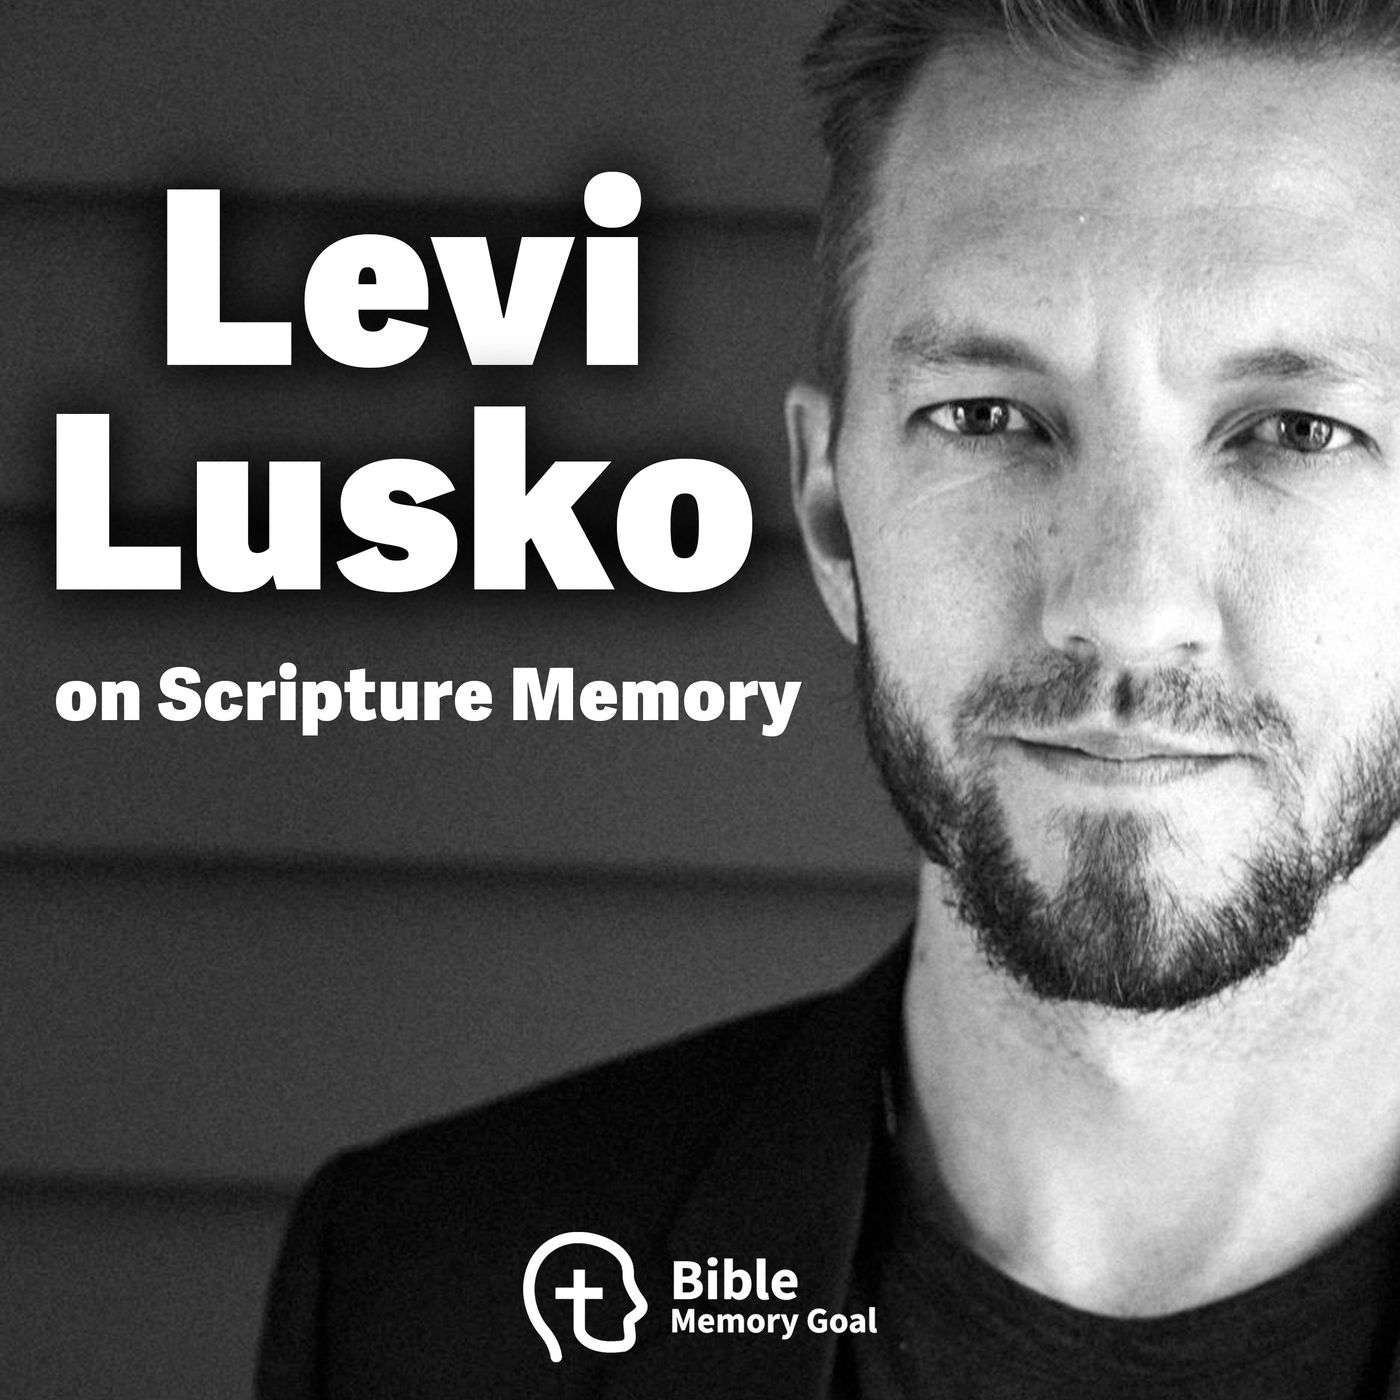 Pastor Levi Lusko on Why it Matters to Memorize the Bible